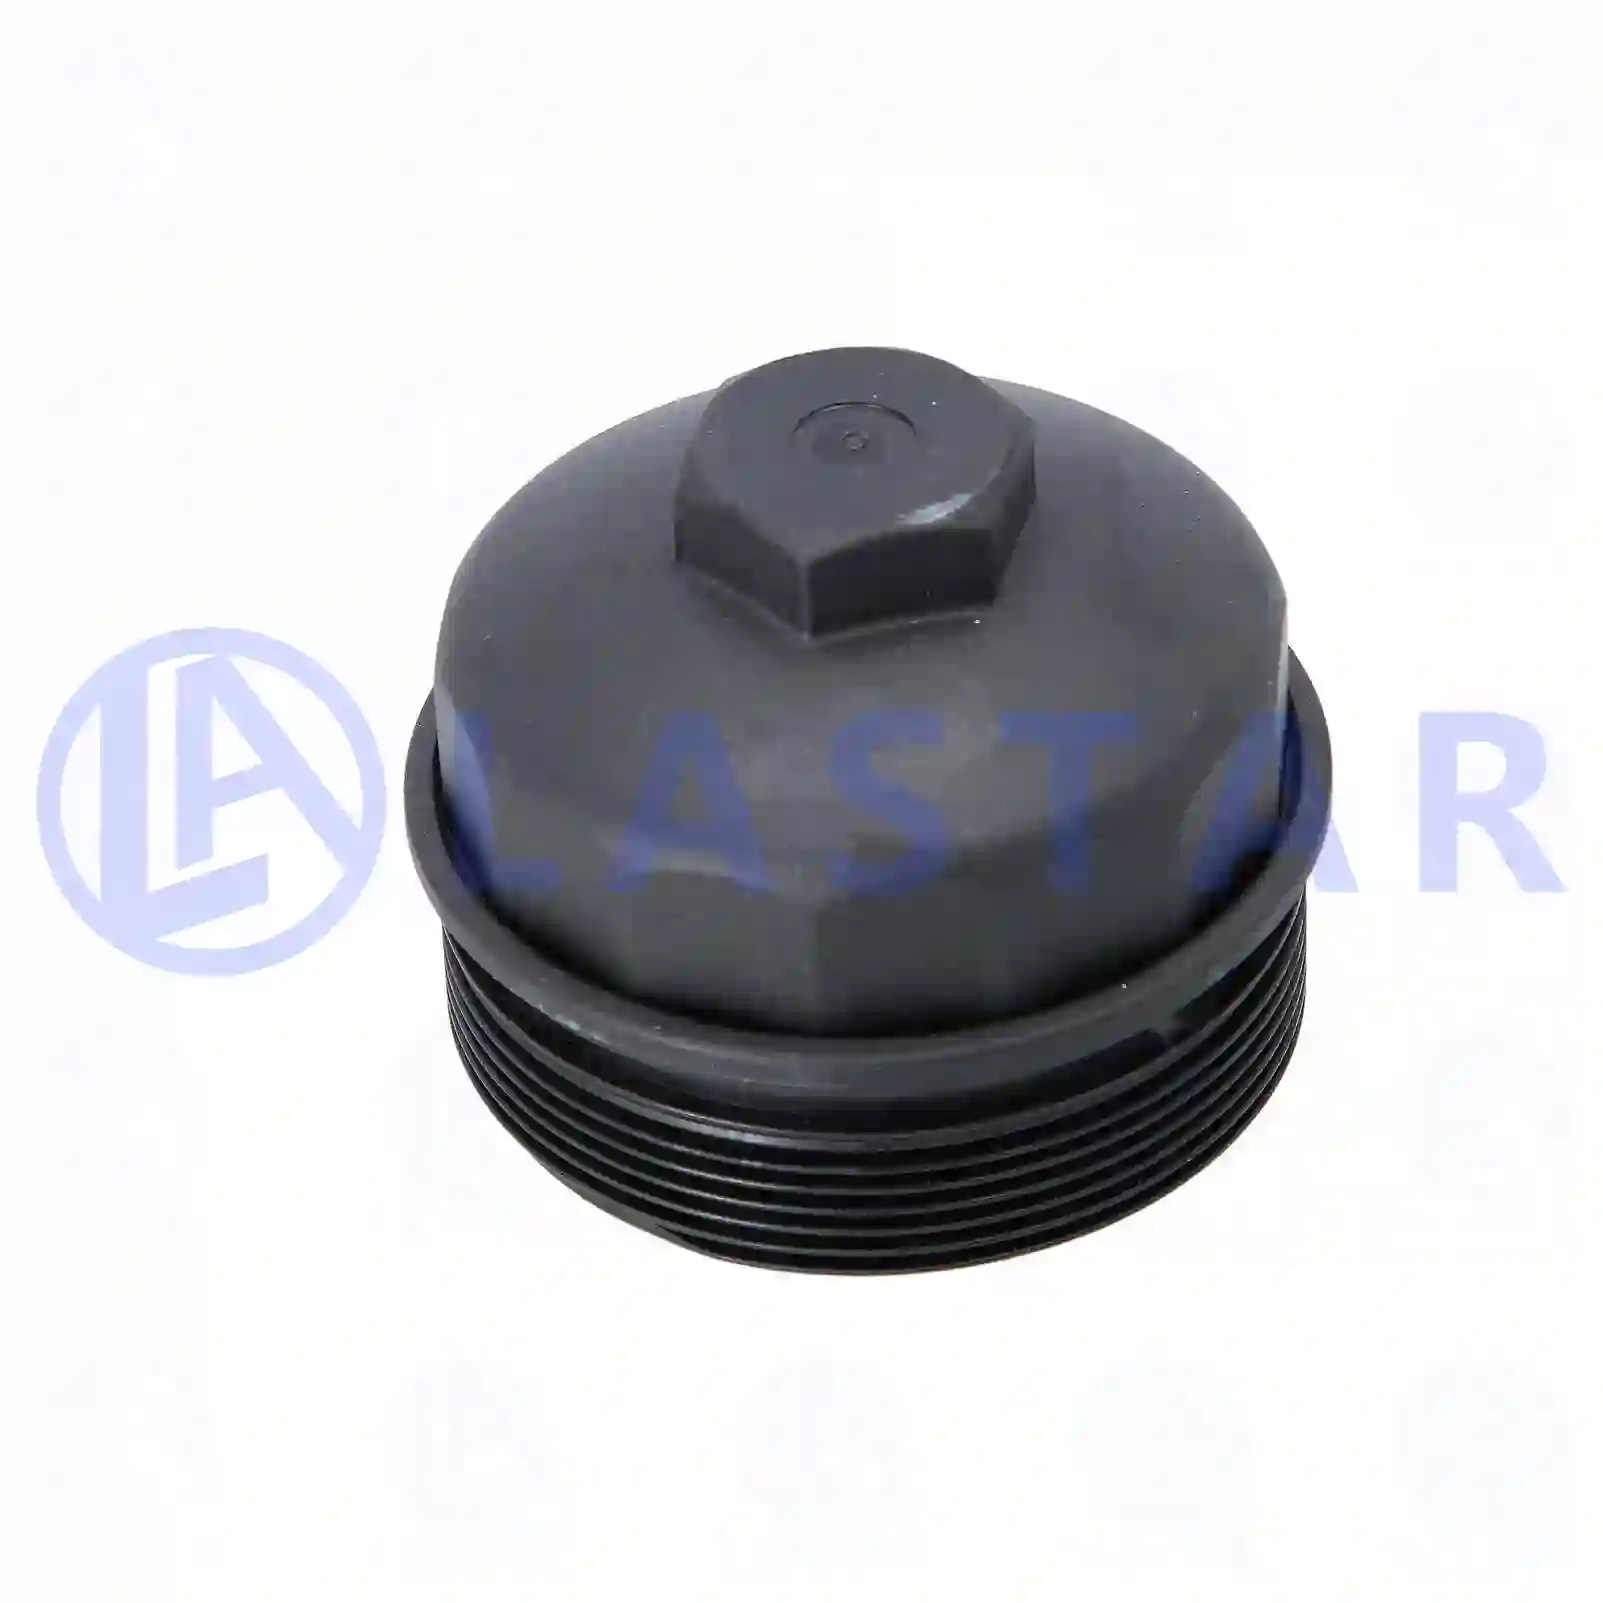 Oil filter cover, 77702054, 0001802338, ZG01727-0008, ||  77702054 Lastar Spare Part | Truck Spare Parts, Auotomotive Spare Parts Oil filter cover, 77702054, 0001802338, ZG01727-0008, ||  77702054 Lastar Spare Part | Truck Spare Parts, Auotomotive Spare Parts